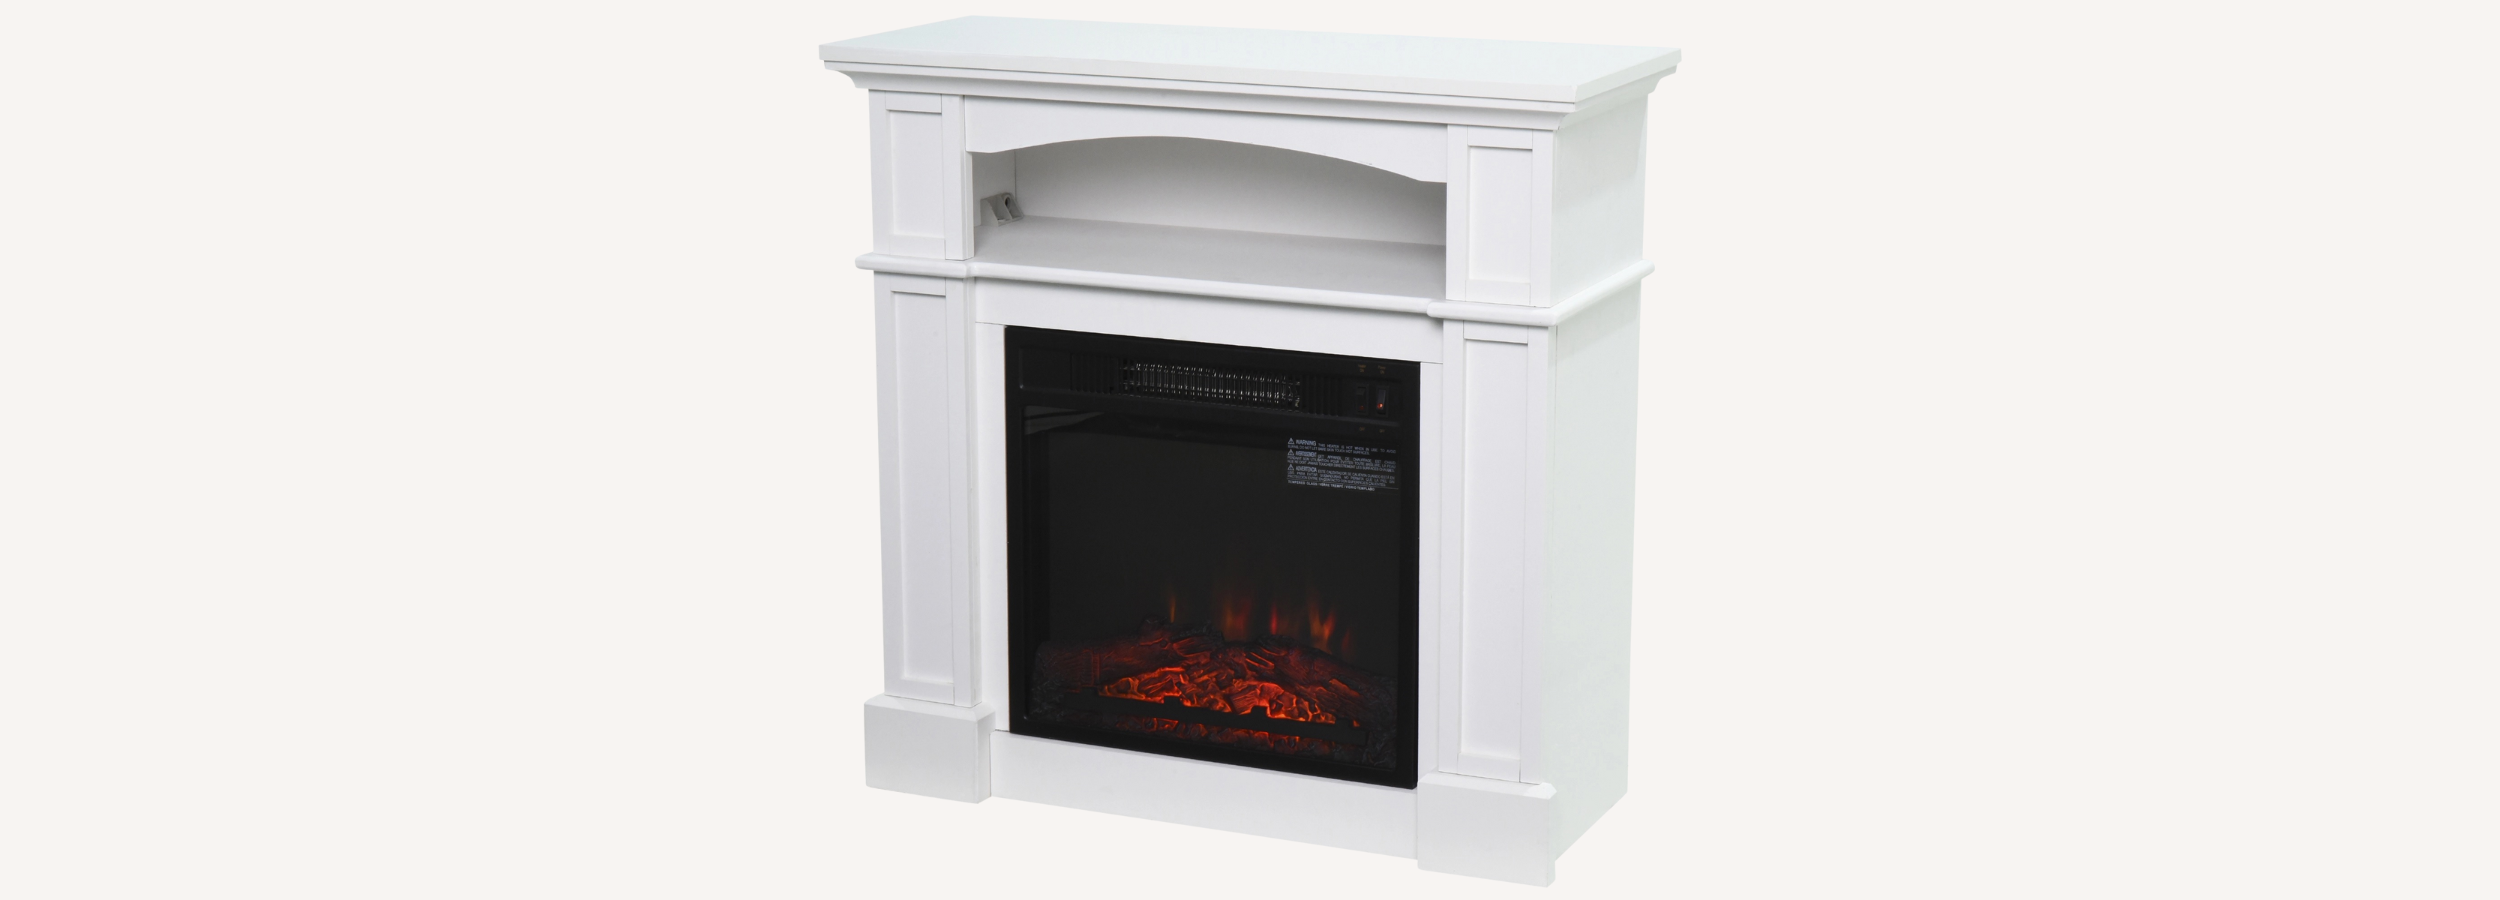 Freestanding Fireplaces on sale today 